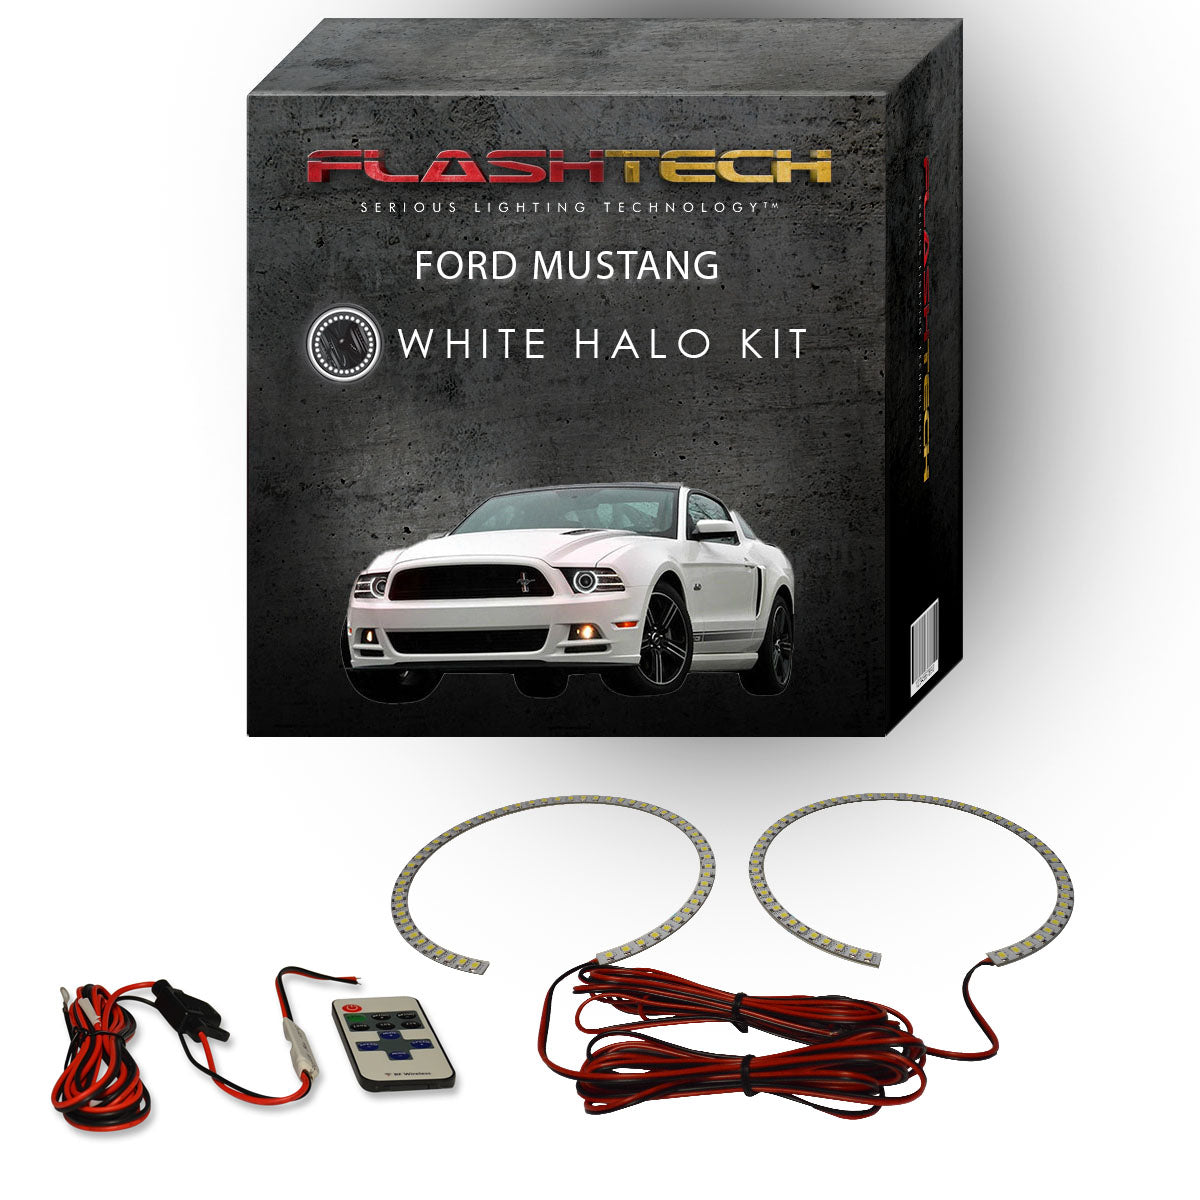 Ford-Mustang-2010, 2011, 2012, 2013, 2014-LED-Halo-Headlights-White-RF Remote White-FO-MUP1014-WHRF